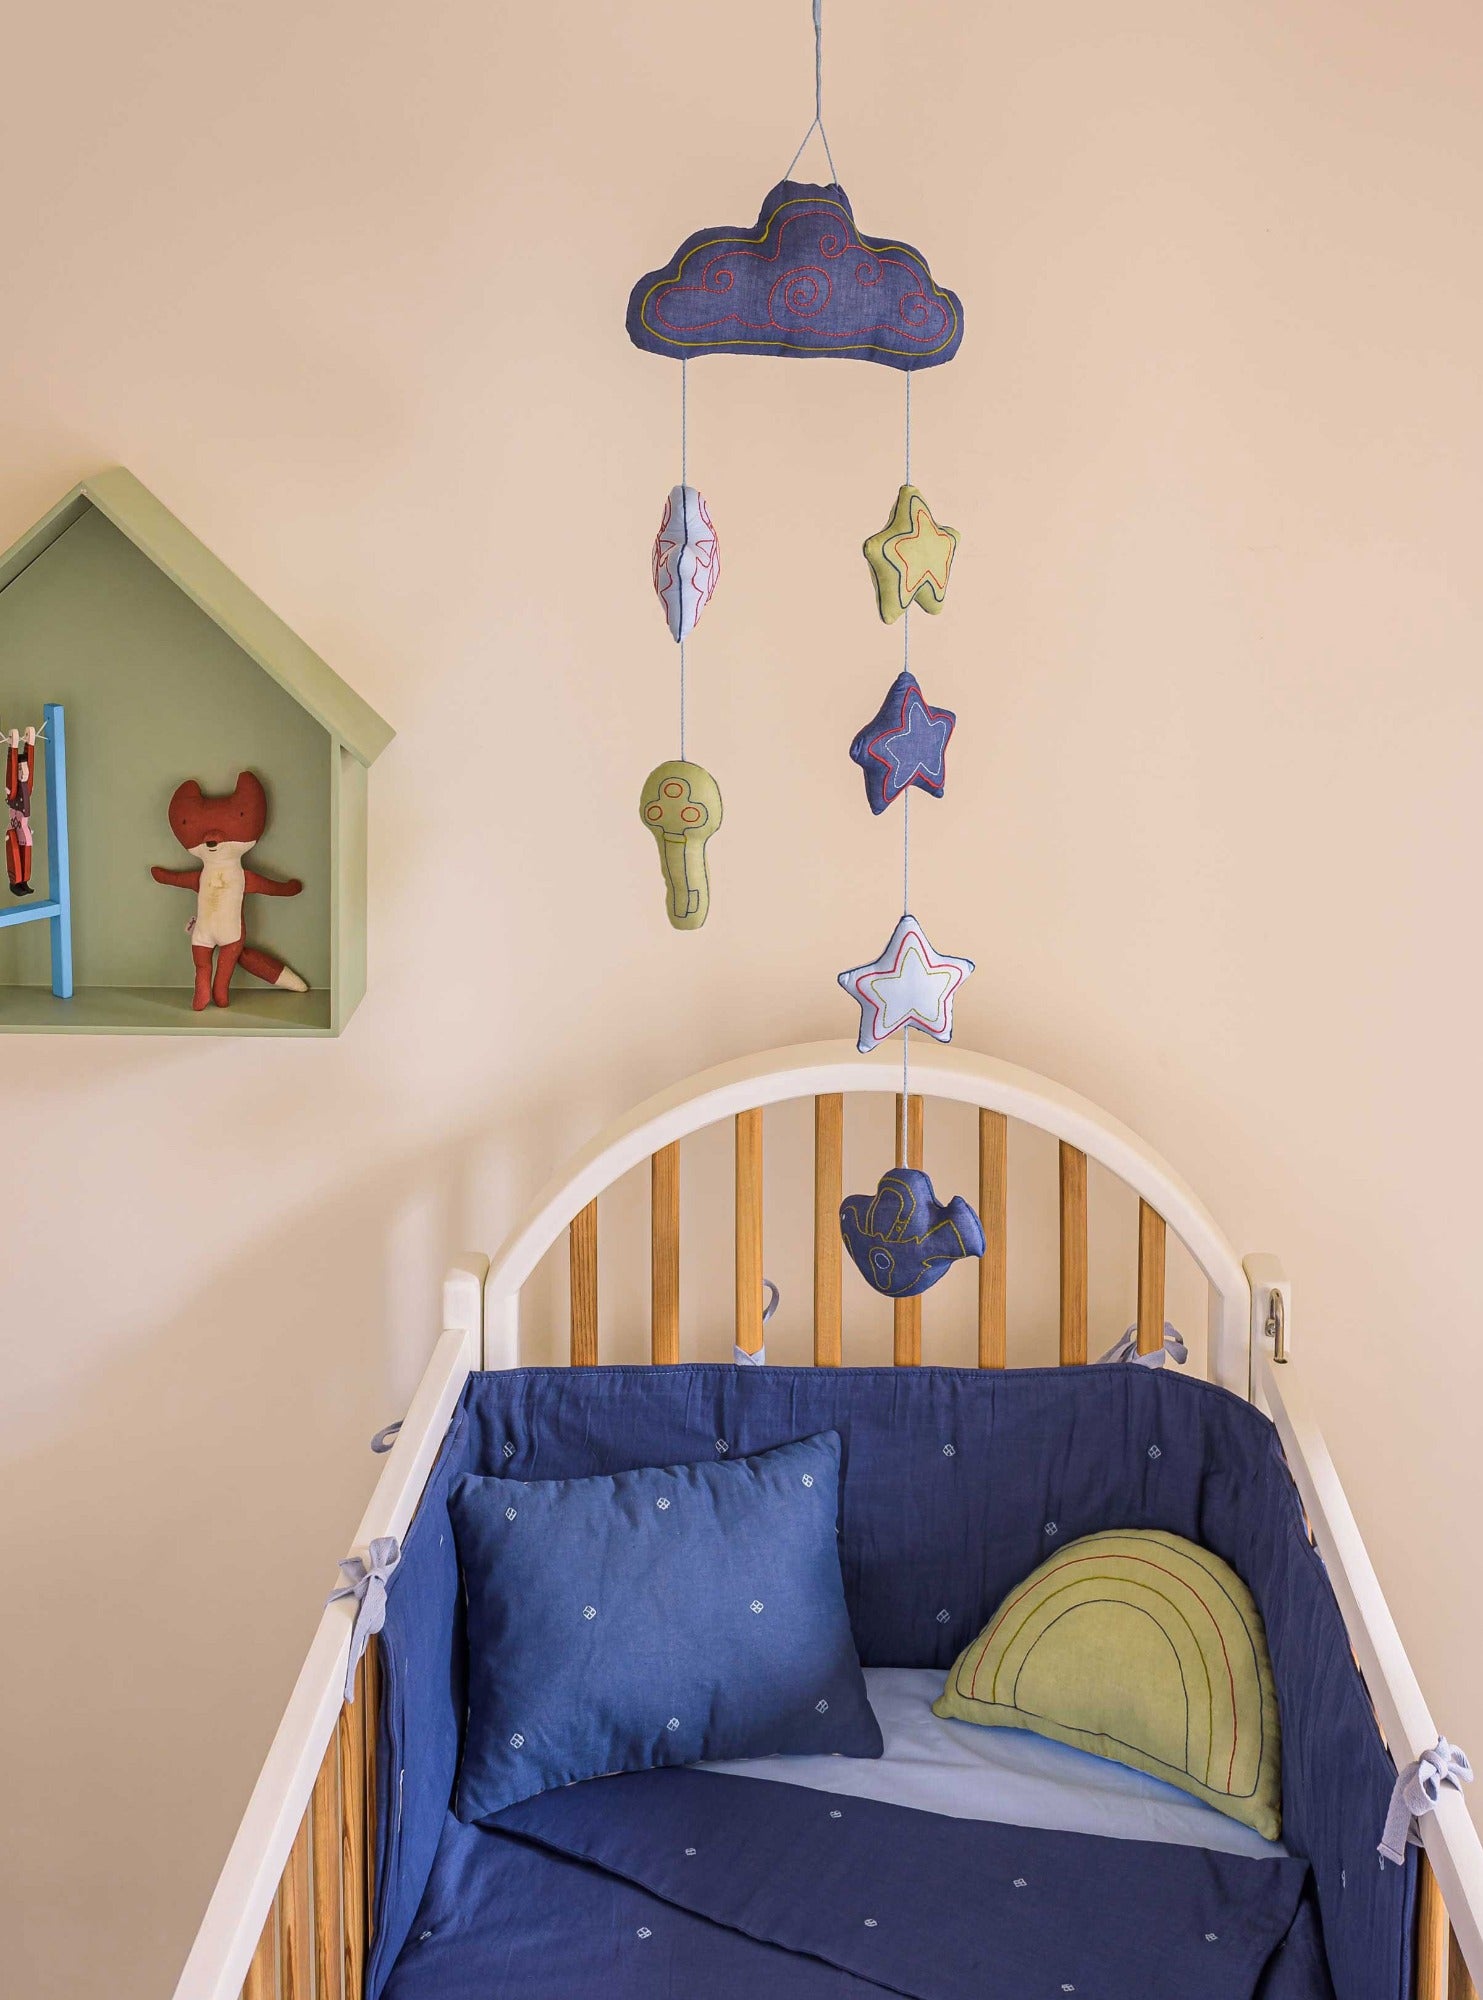 Blue Bandook pillow, blanket, bumper, Moshkel Gosha baby mobile with Lime rainbow cushion all set up in a baby nursery room